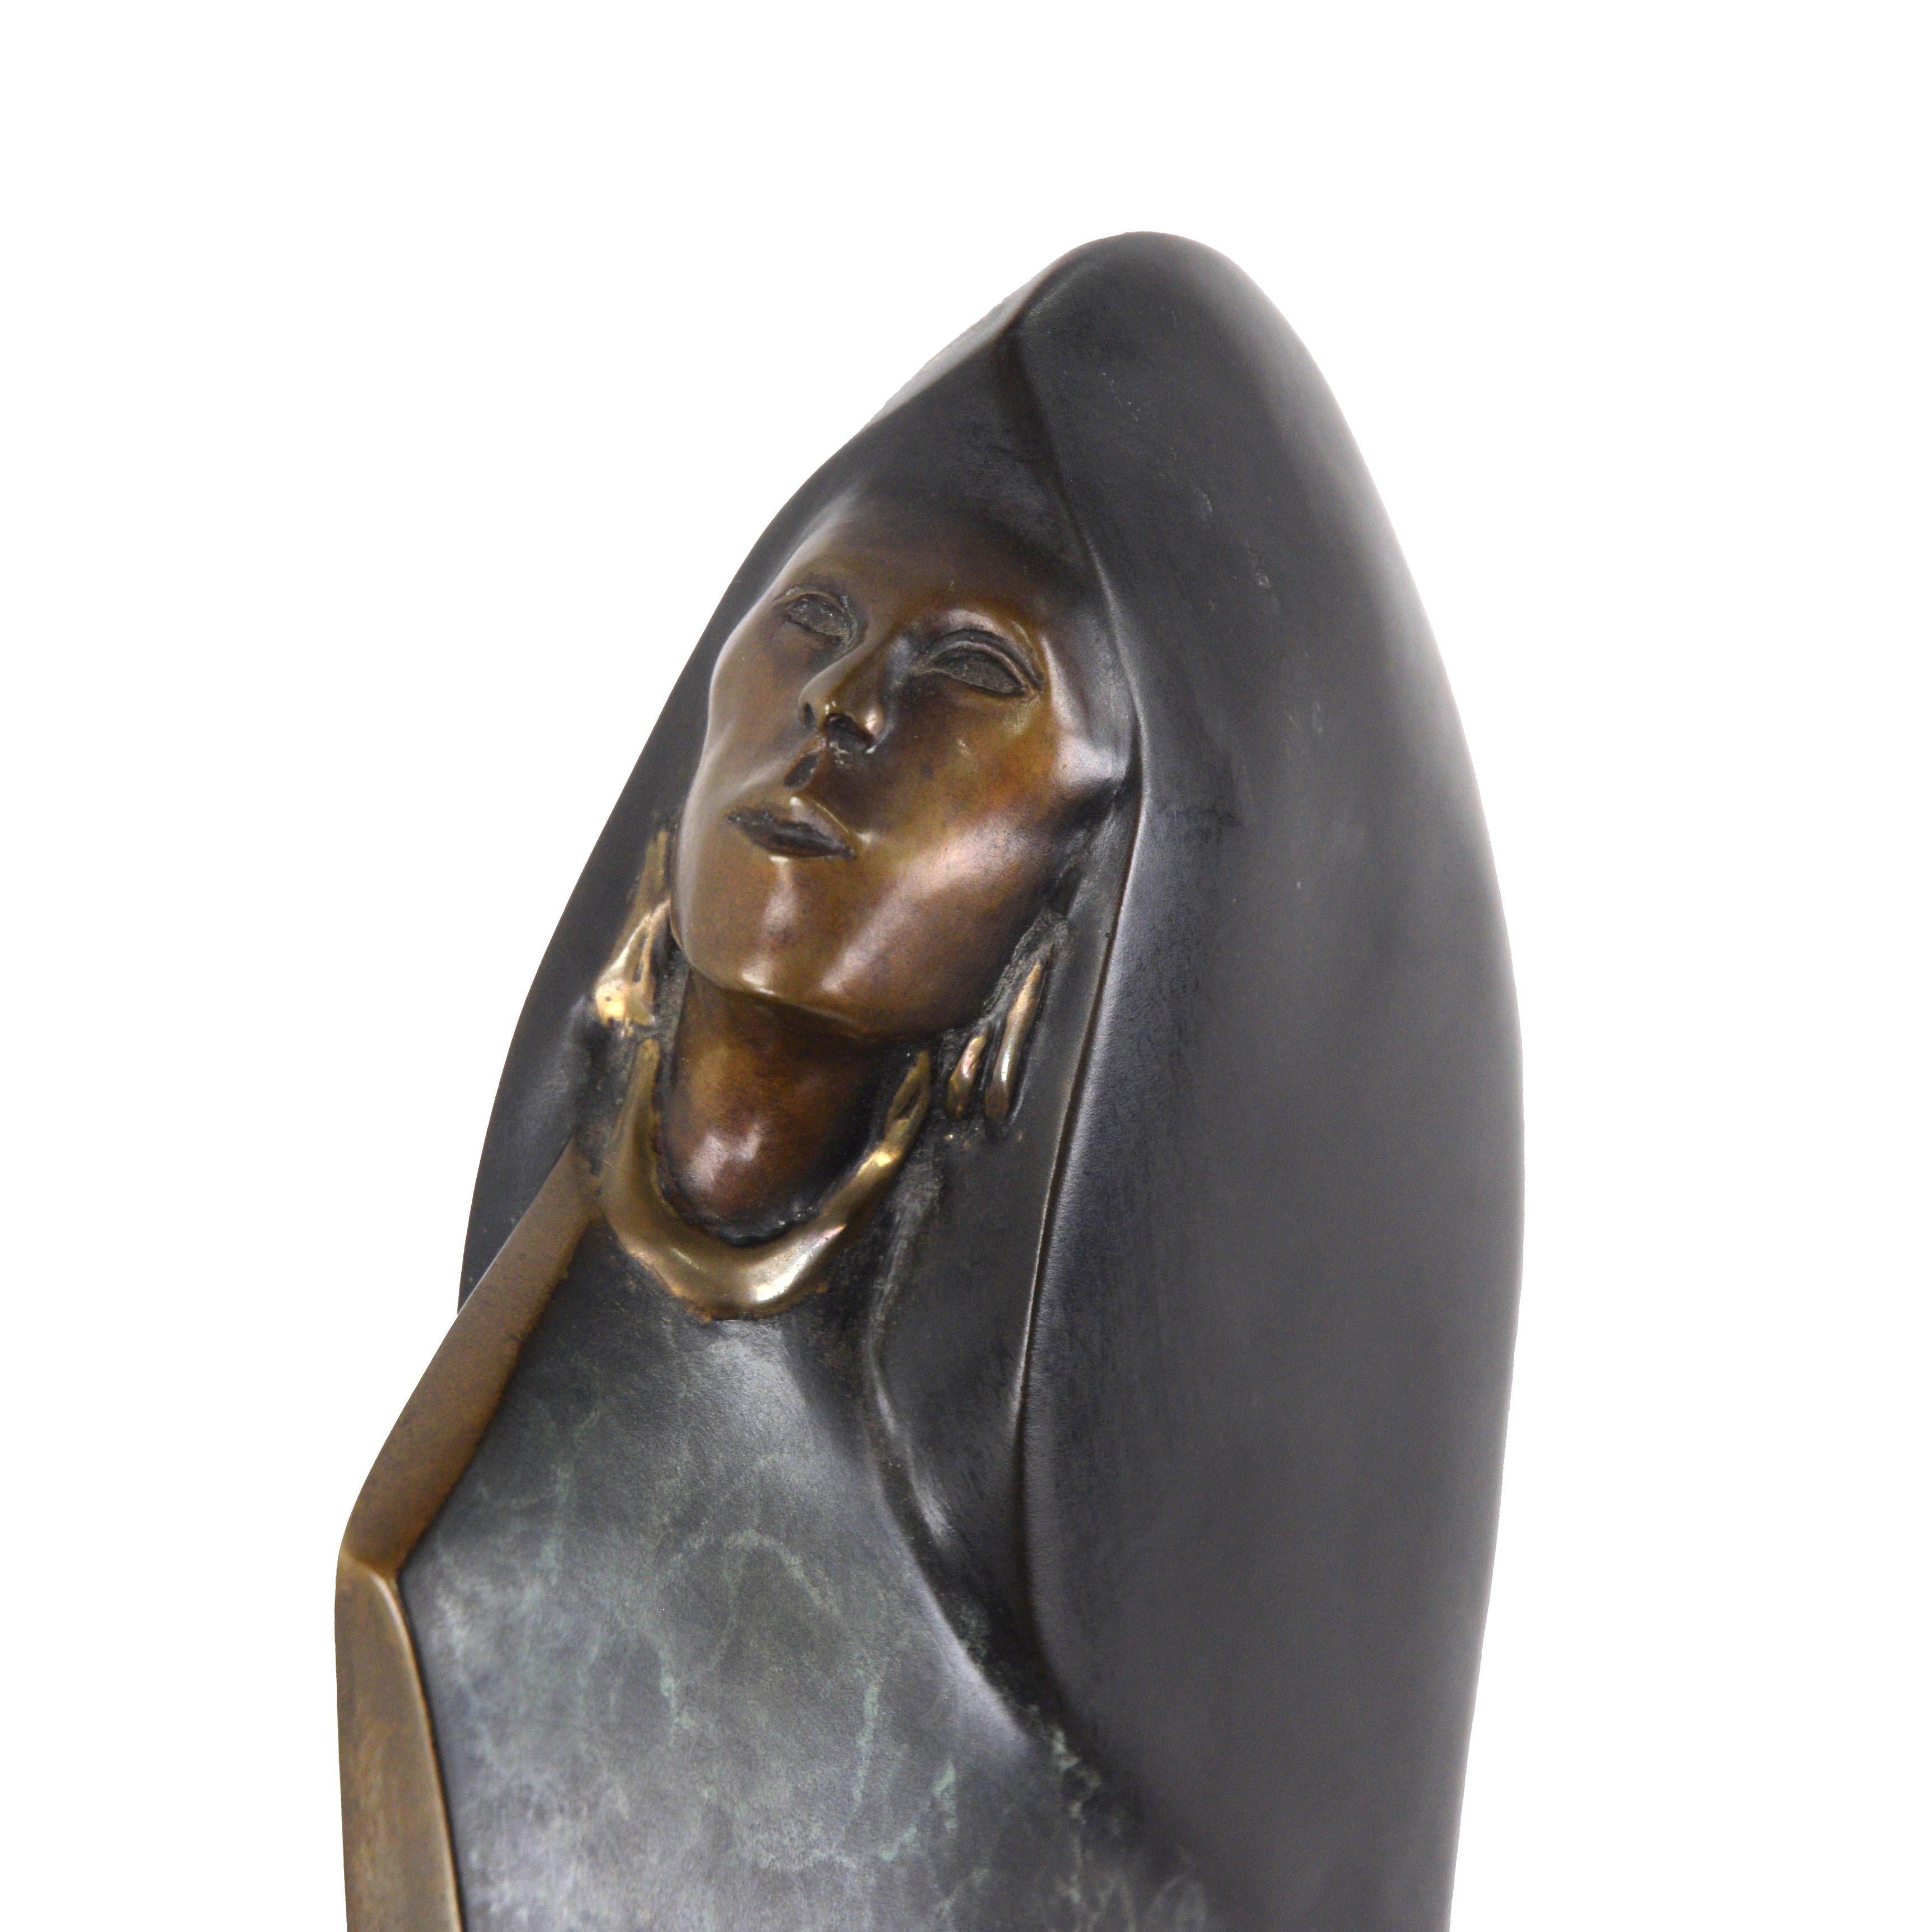 Looking up to the Sky - Female Figurative Sculpture - Gold Abstract Sculpture by Robert Garcia